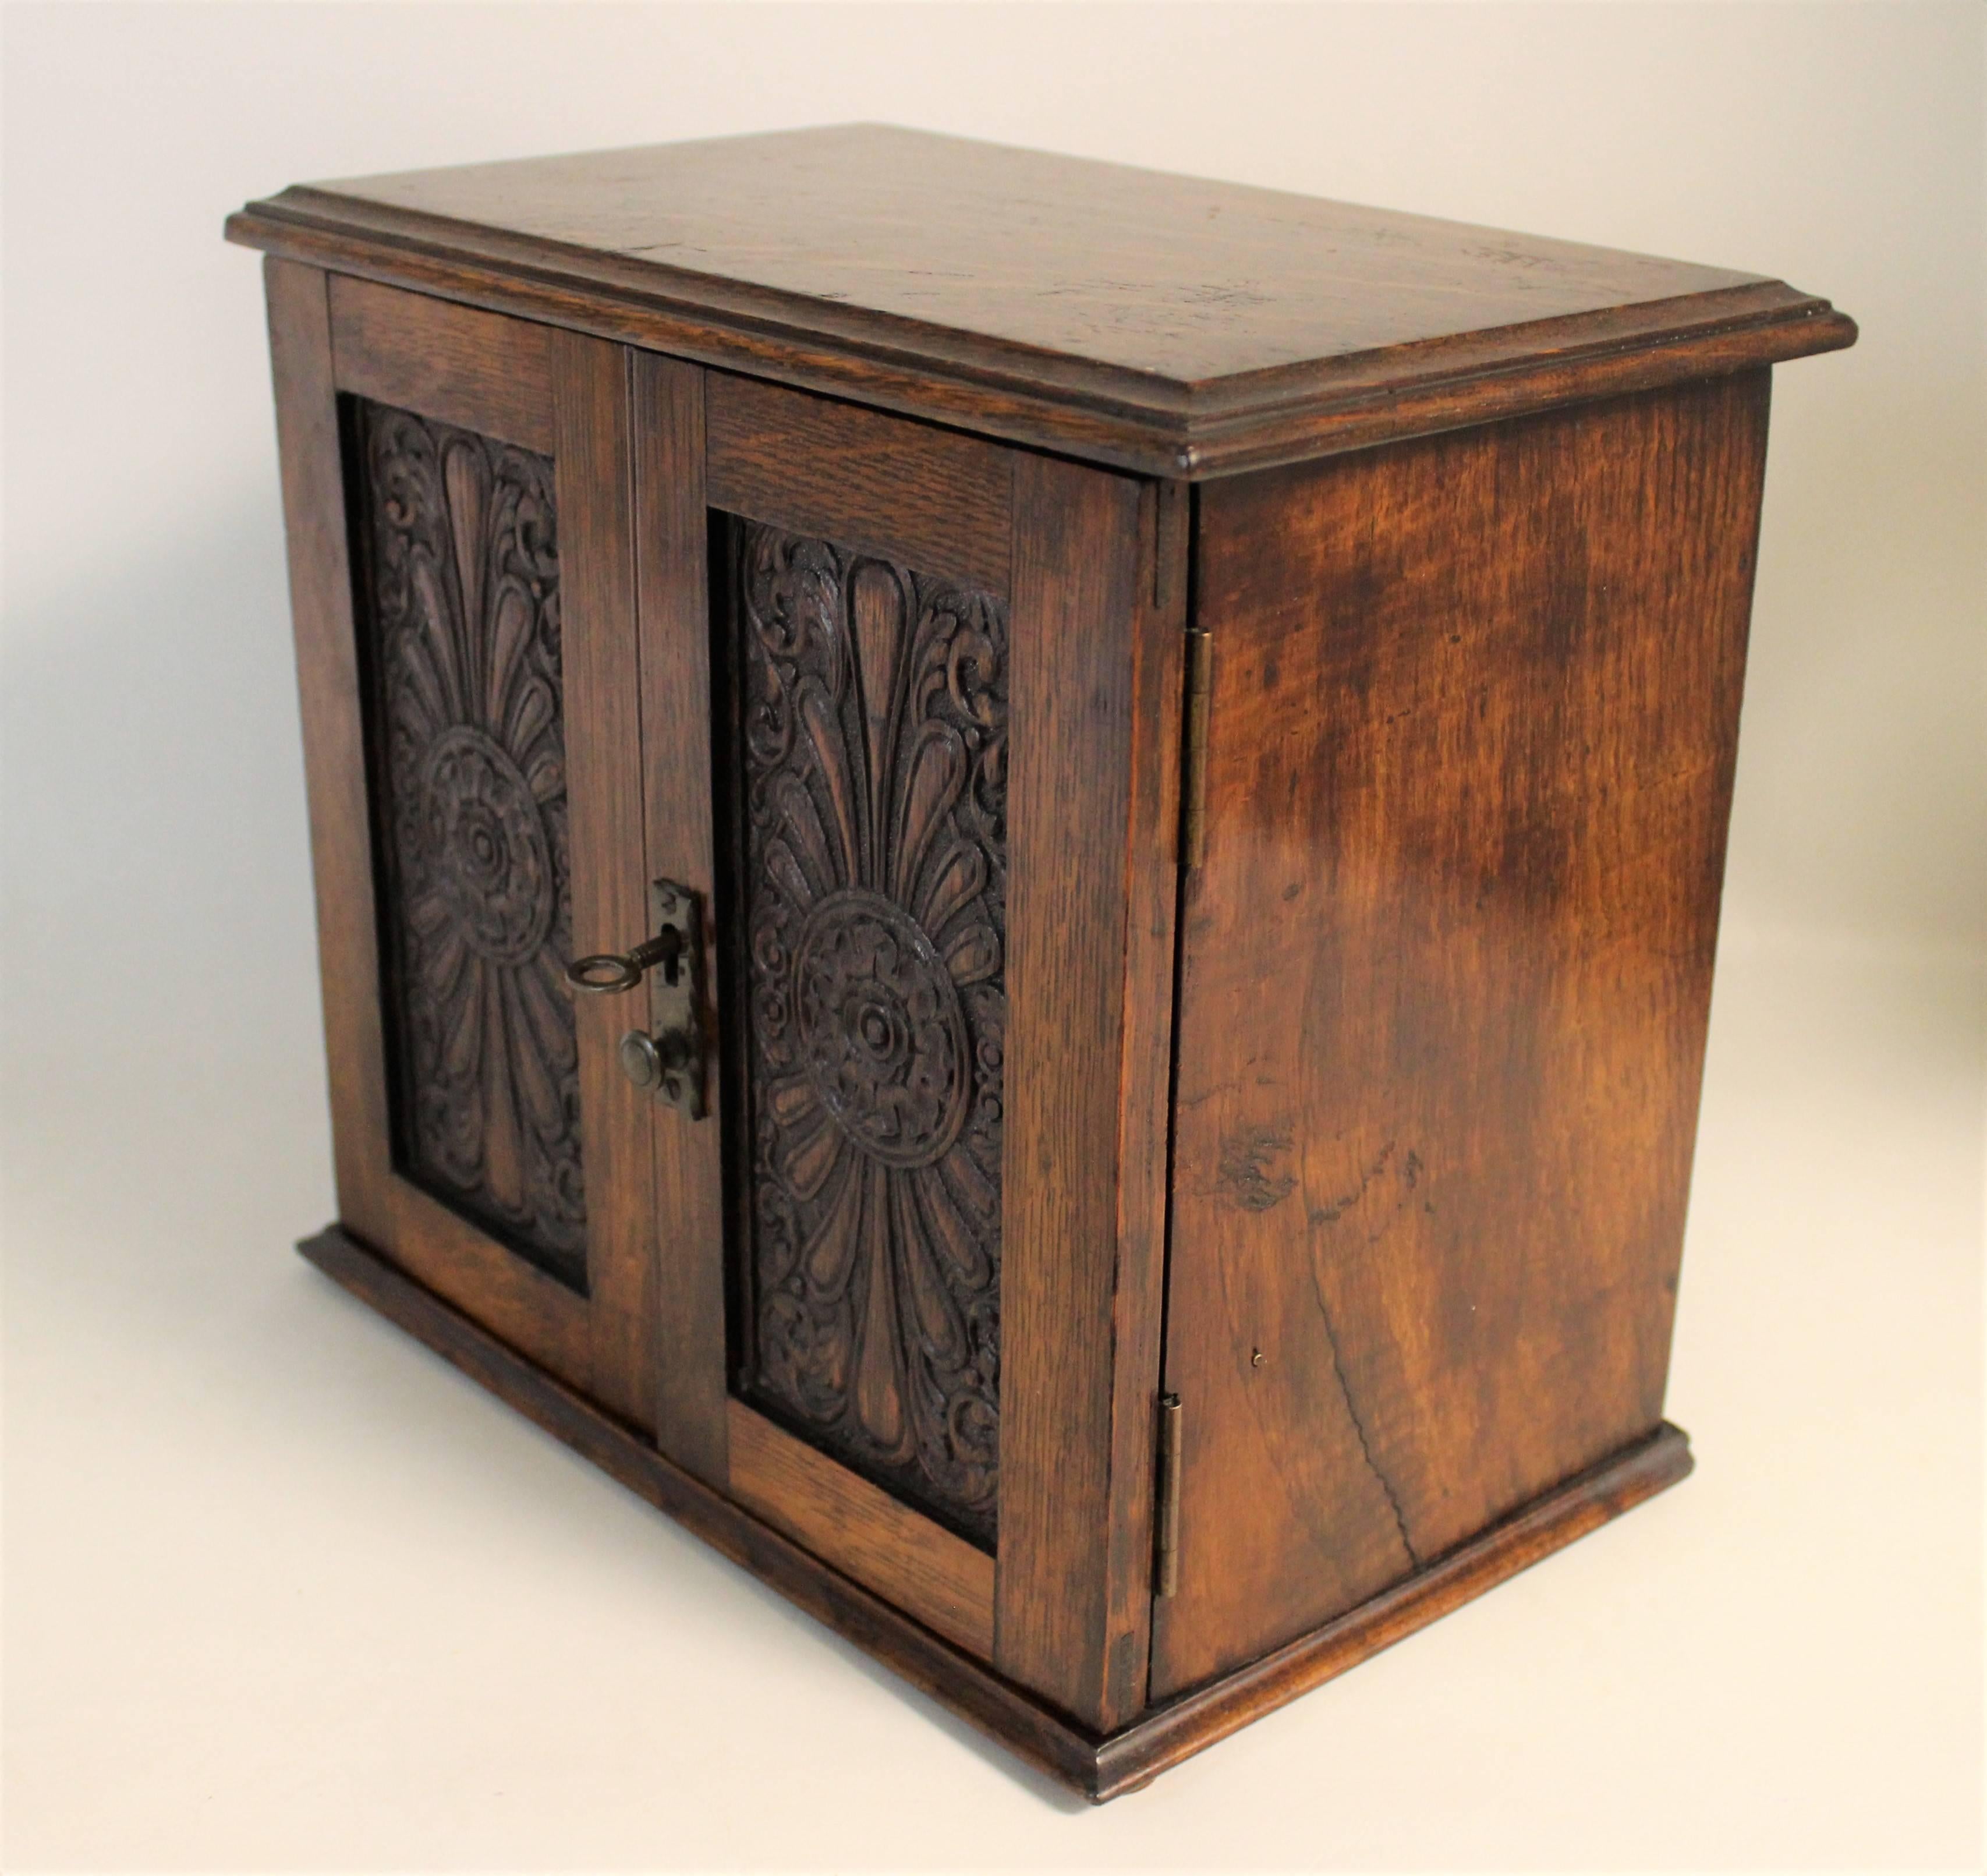 English Edwardian era smoking cabinet. This unique piece features two carved wood panels on the doors that pen to reveal a spot for your pipes, tobacco and cigars with two drawers for your tools and a flip-top lid that reveals an additional spot for